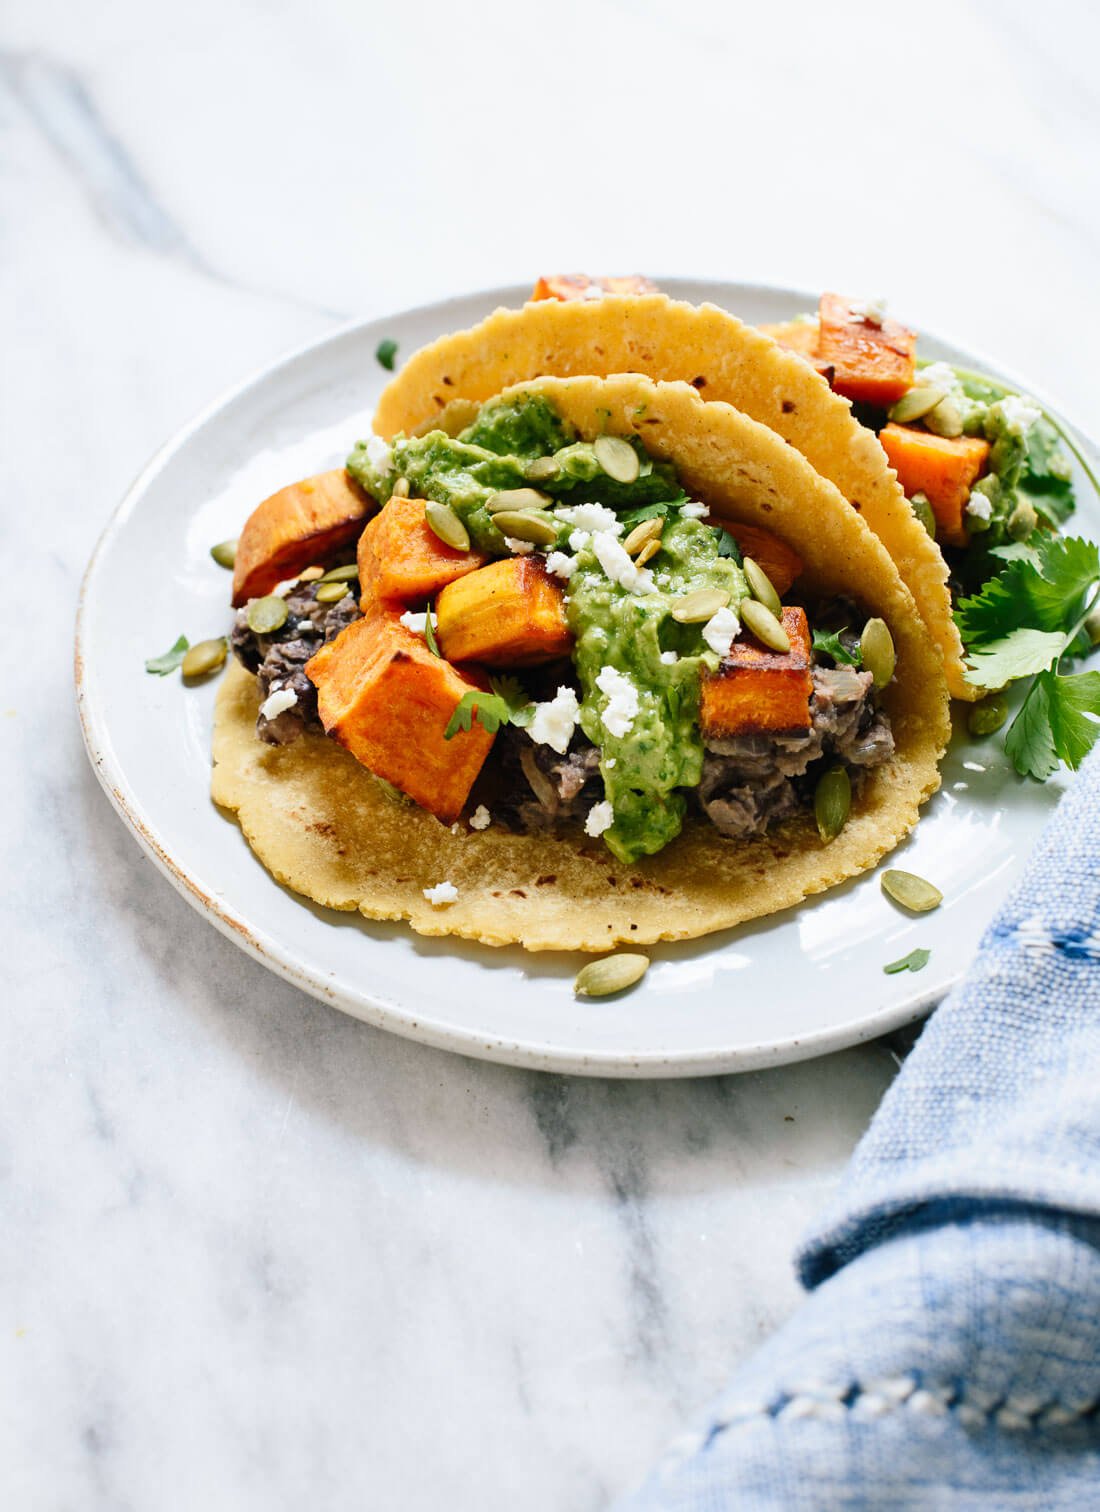 Assemble the Tacos with Roasted Sweet Potatoes and Black Beans